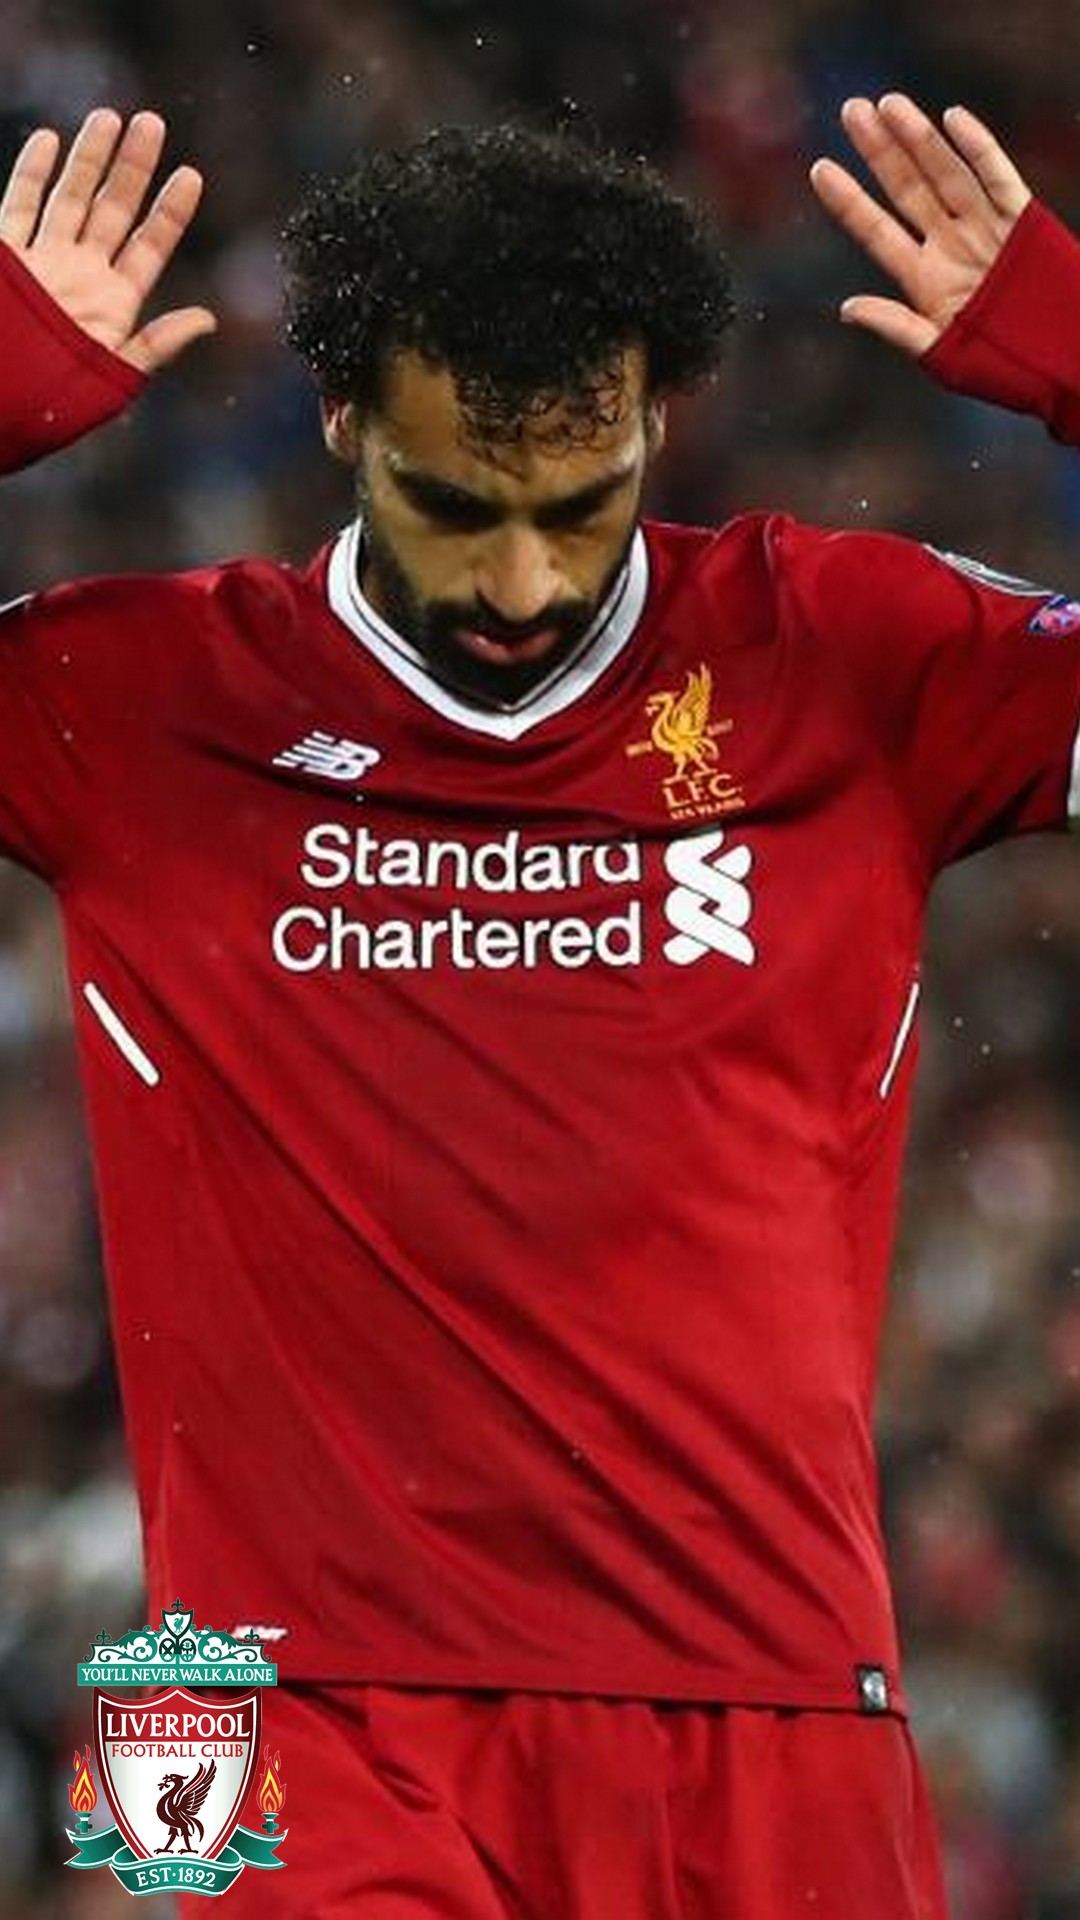 Liverpool Mohamed Salah iPhone Wallpaper with image resolution 1080x1920 pixel. You can make this wallpaper for your iPhone 5, 6, 7, 8, X backgrounds, Mobile Screensaver, or iPad Lock Screen